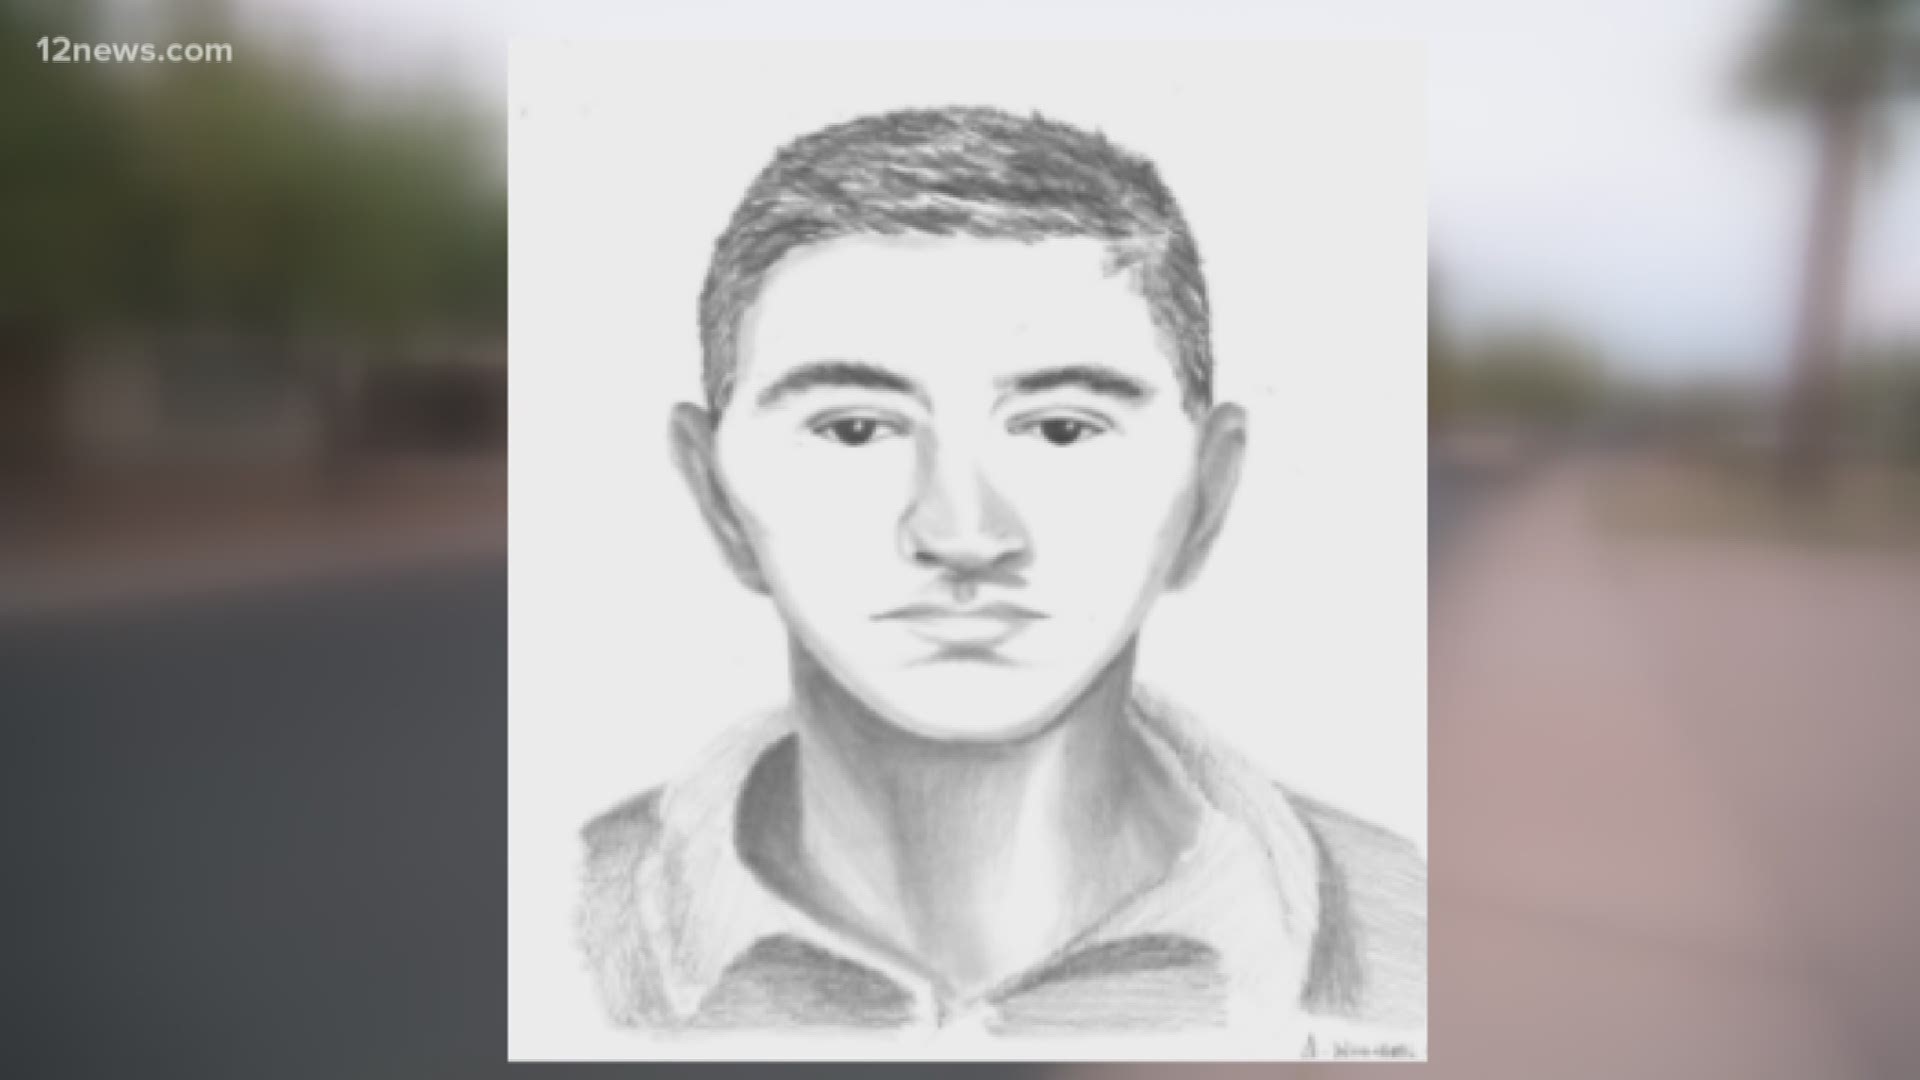 Police released a sketch of the hit-and-run driver who struck a family of three in Tempe, resulting in the hospitalization of a 3-year-old boy.